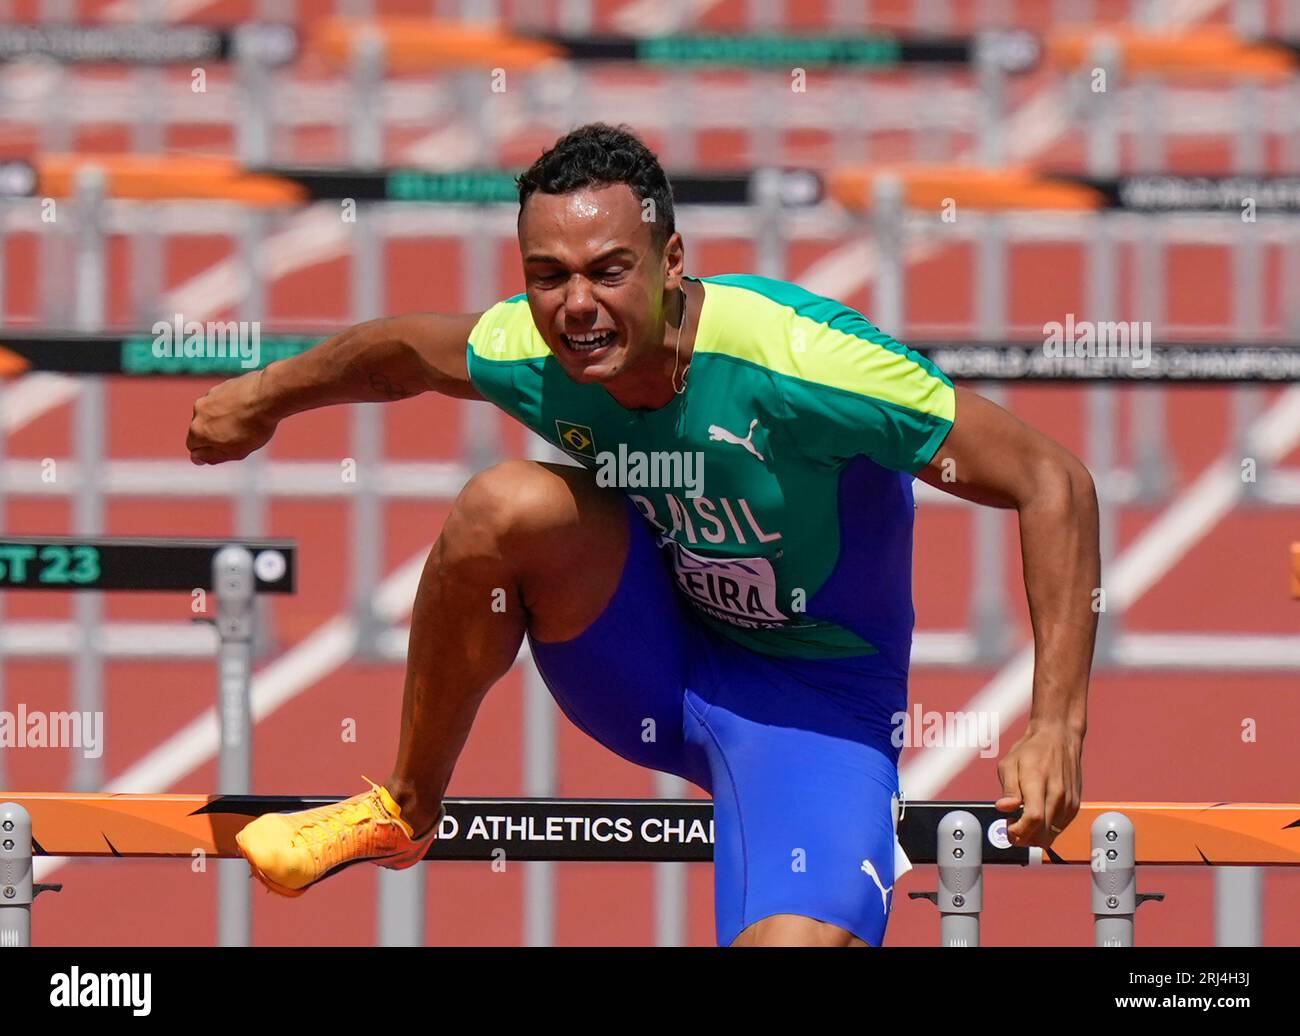 Budapest,HUN,  20 Aug 2023  Rafael Pereira (BRA) in action during the World Athletics Championships 2023 National Athletics Centre Budapest at National Athletics Centre Budapest Hungary on August 20 2023 Alamy Live News Stock Photo